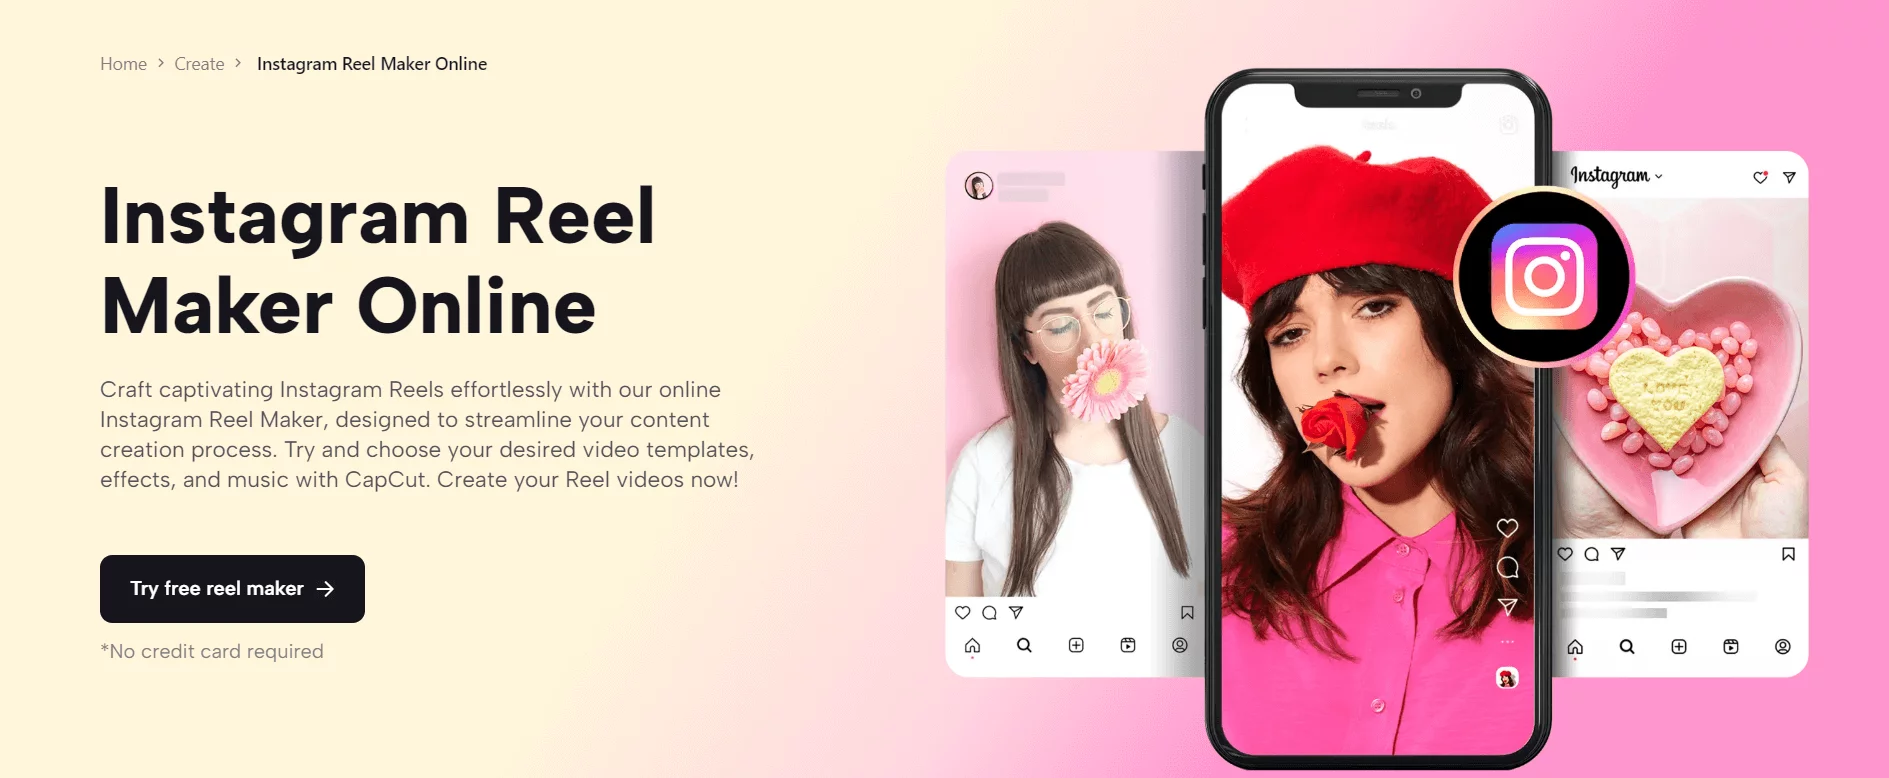 CapCut's webpage promoting an Instagram Reel Maker Online, featuring two women using the app displayed on a smartphone screen.